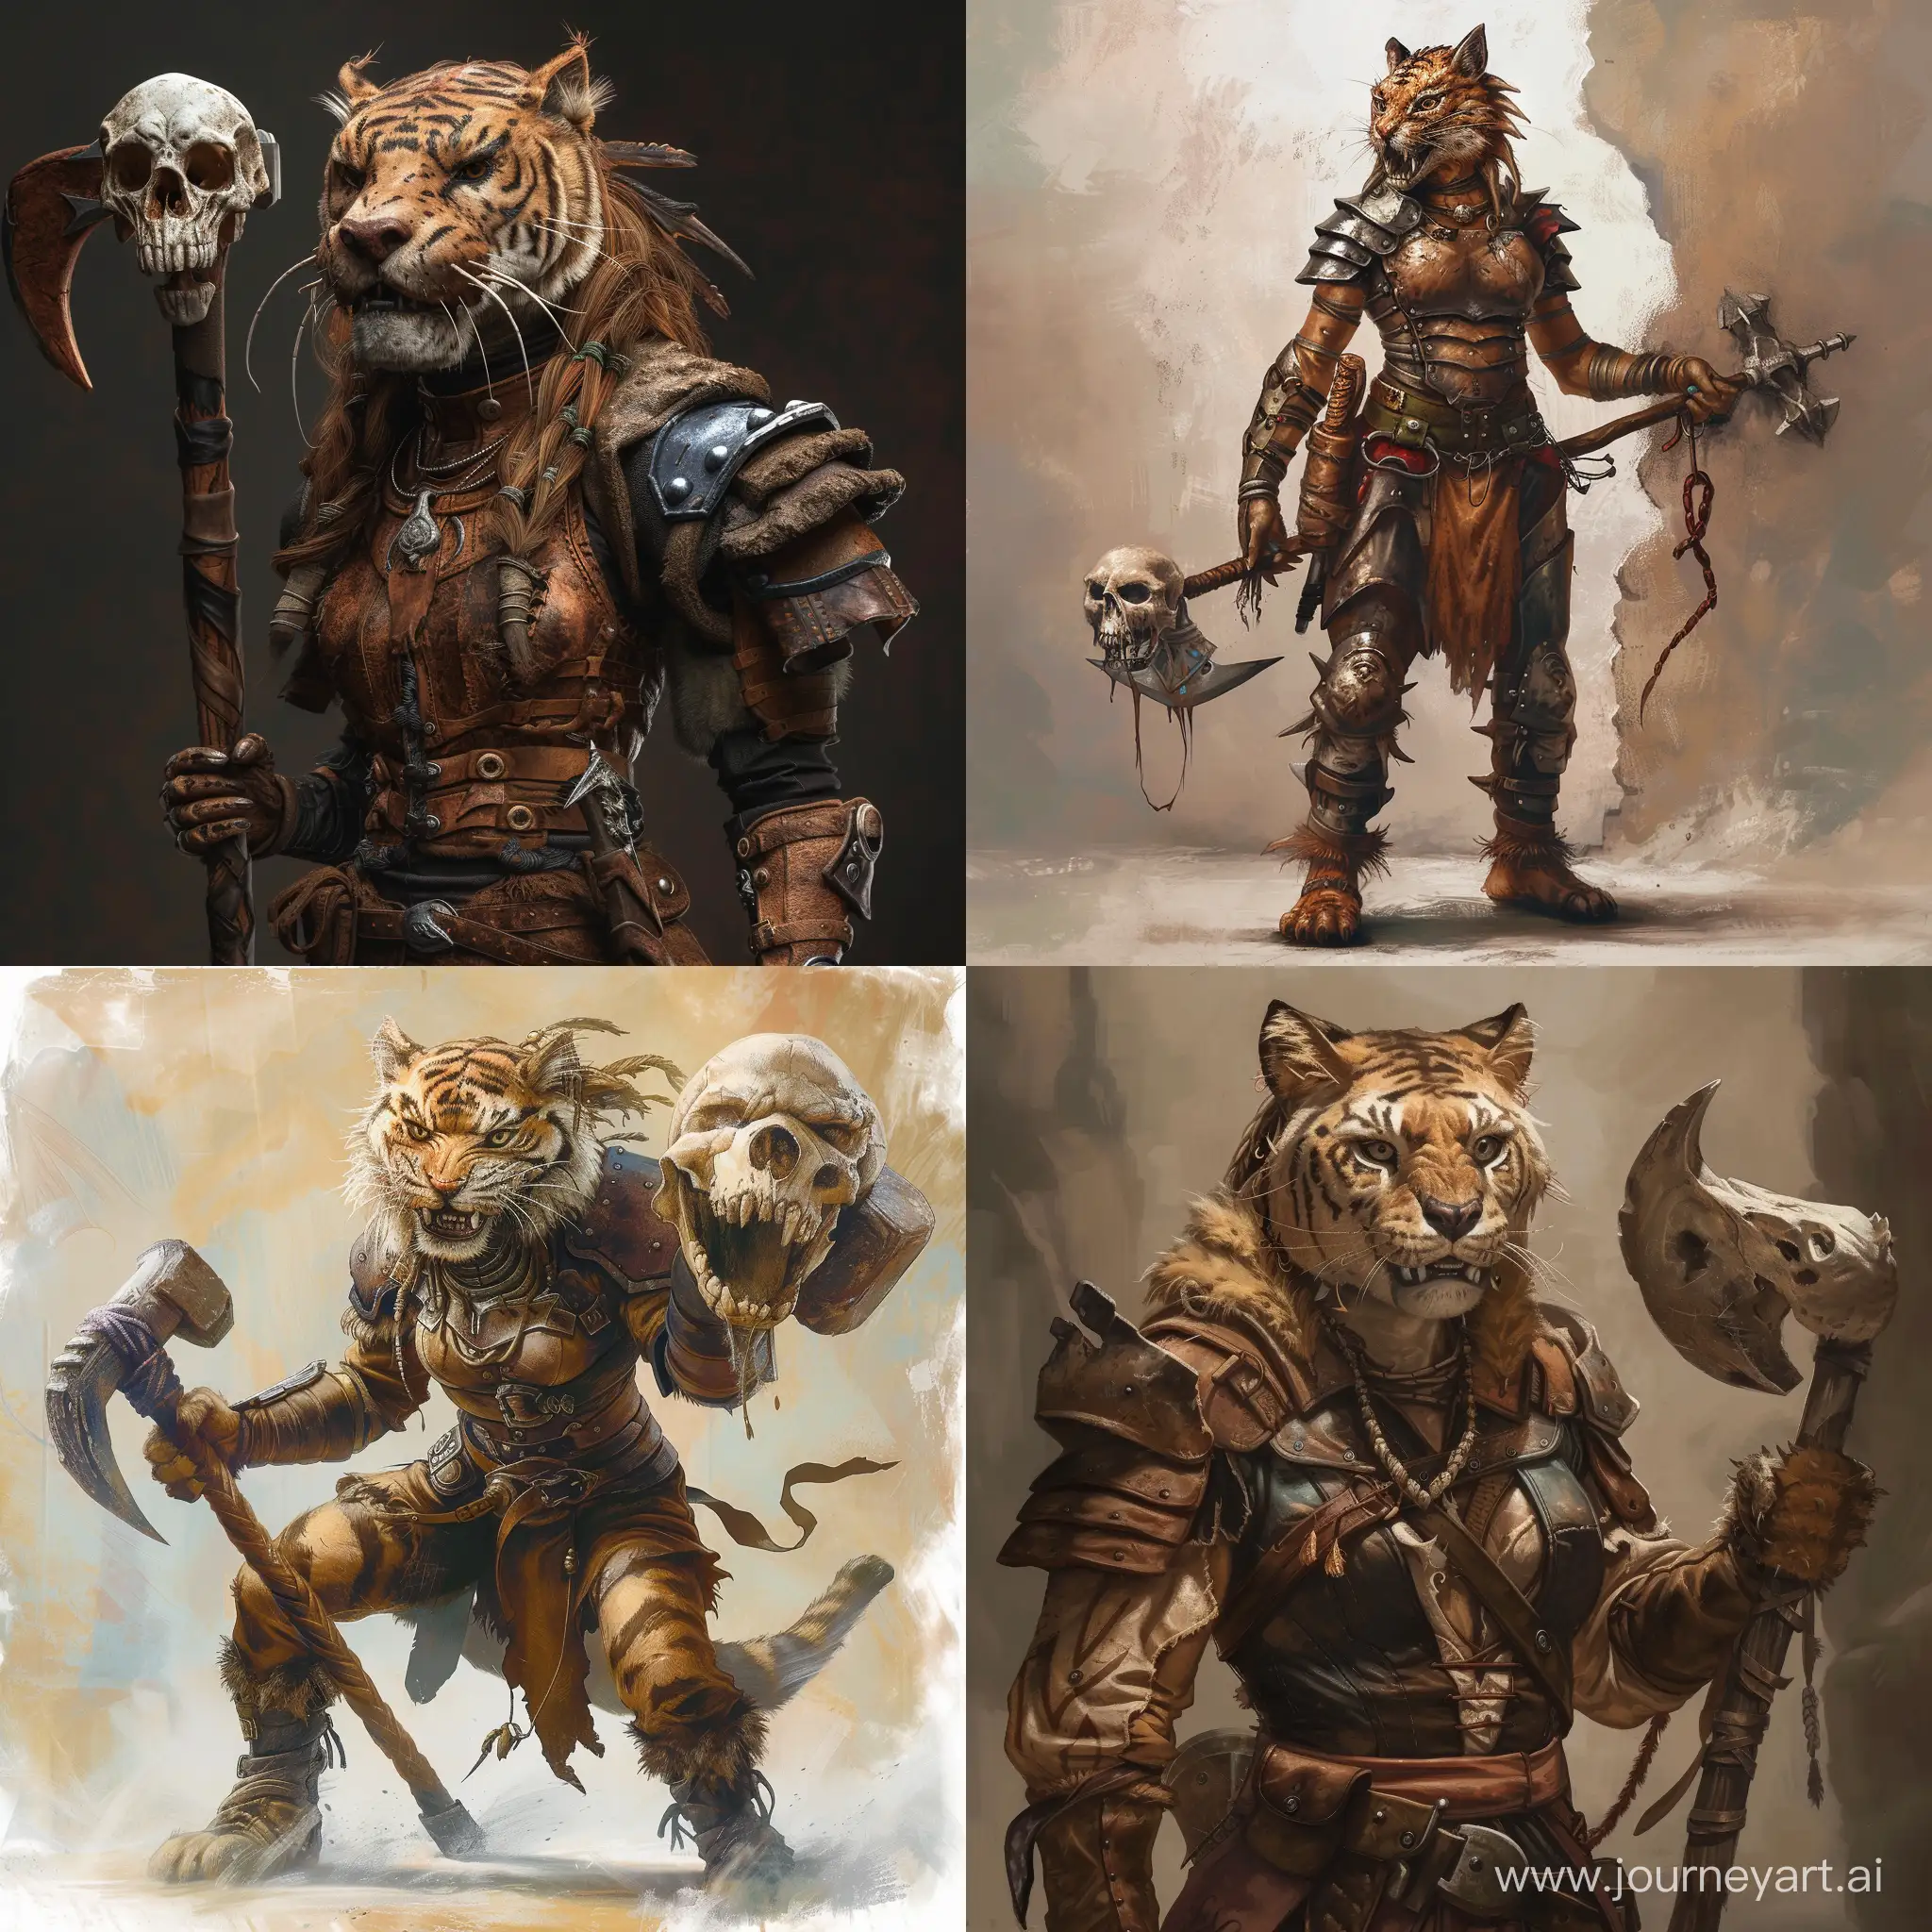 Fierce-Tabaxi-Warrior-SaberToothed-Tigress-in-Leather-Armor-and-Skull-War-Hammer